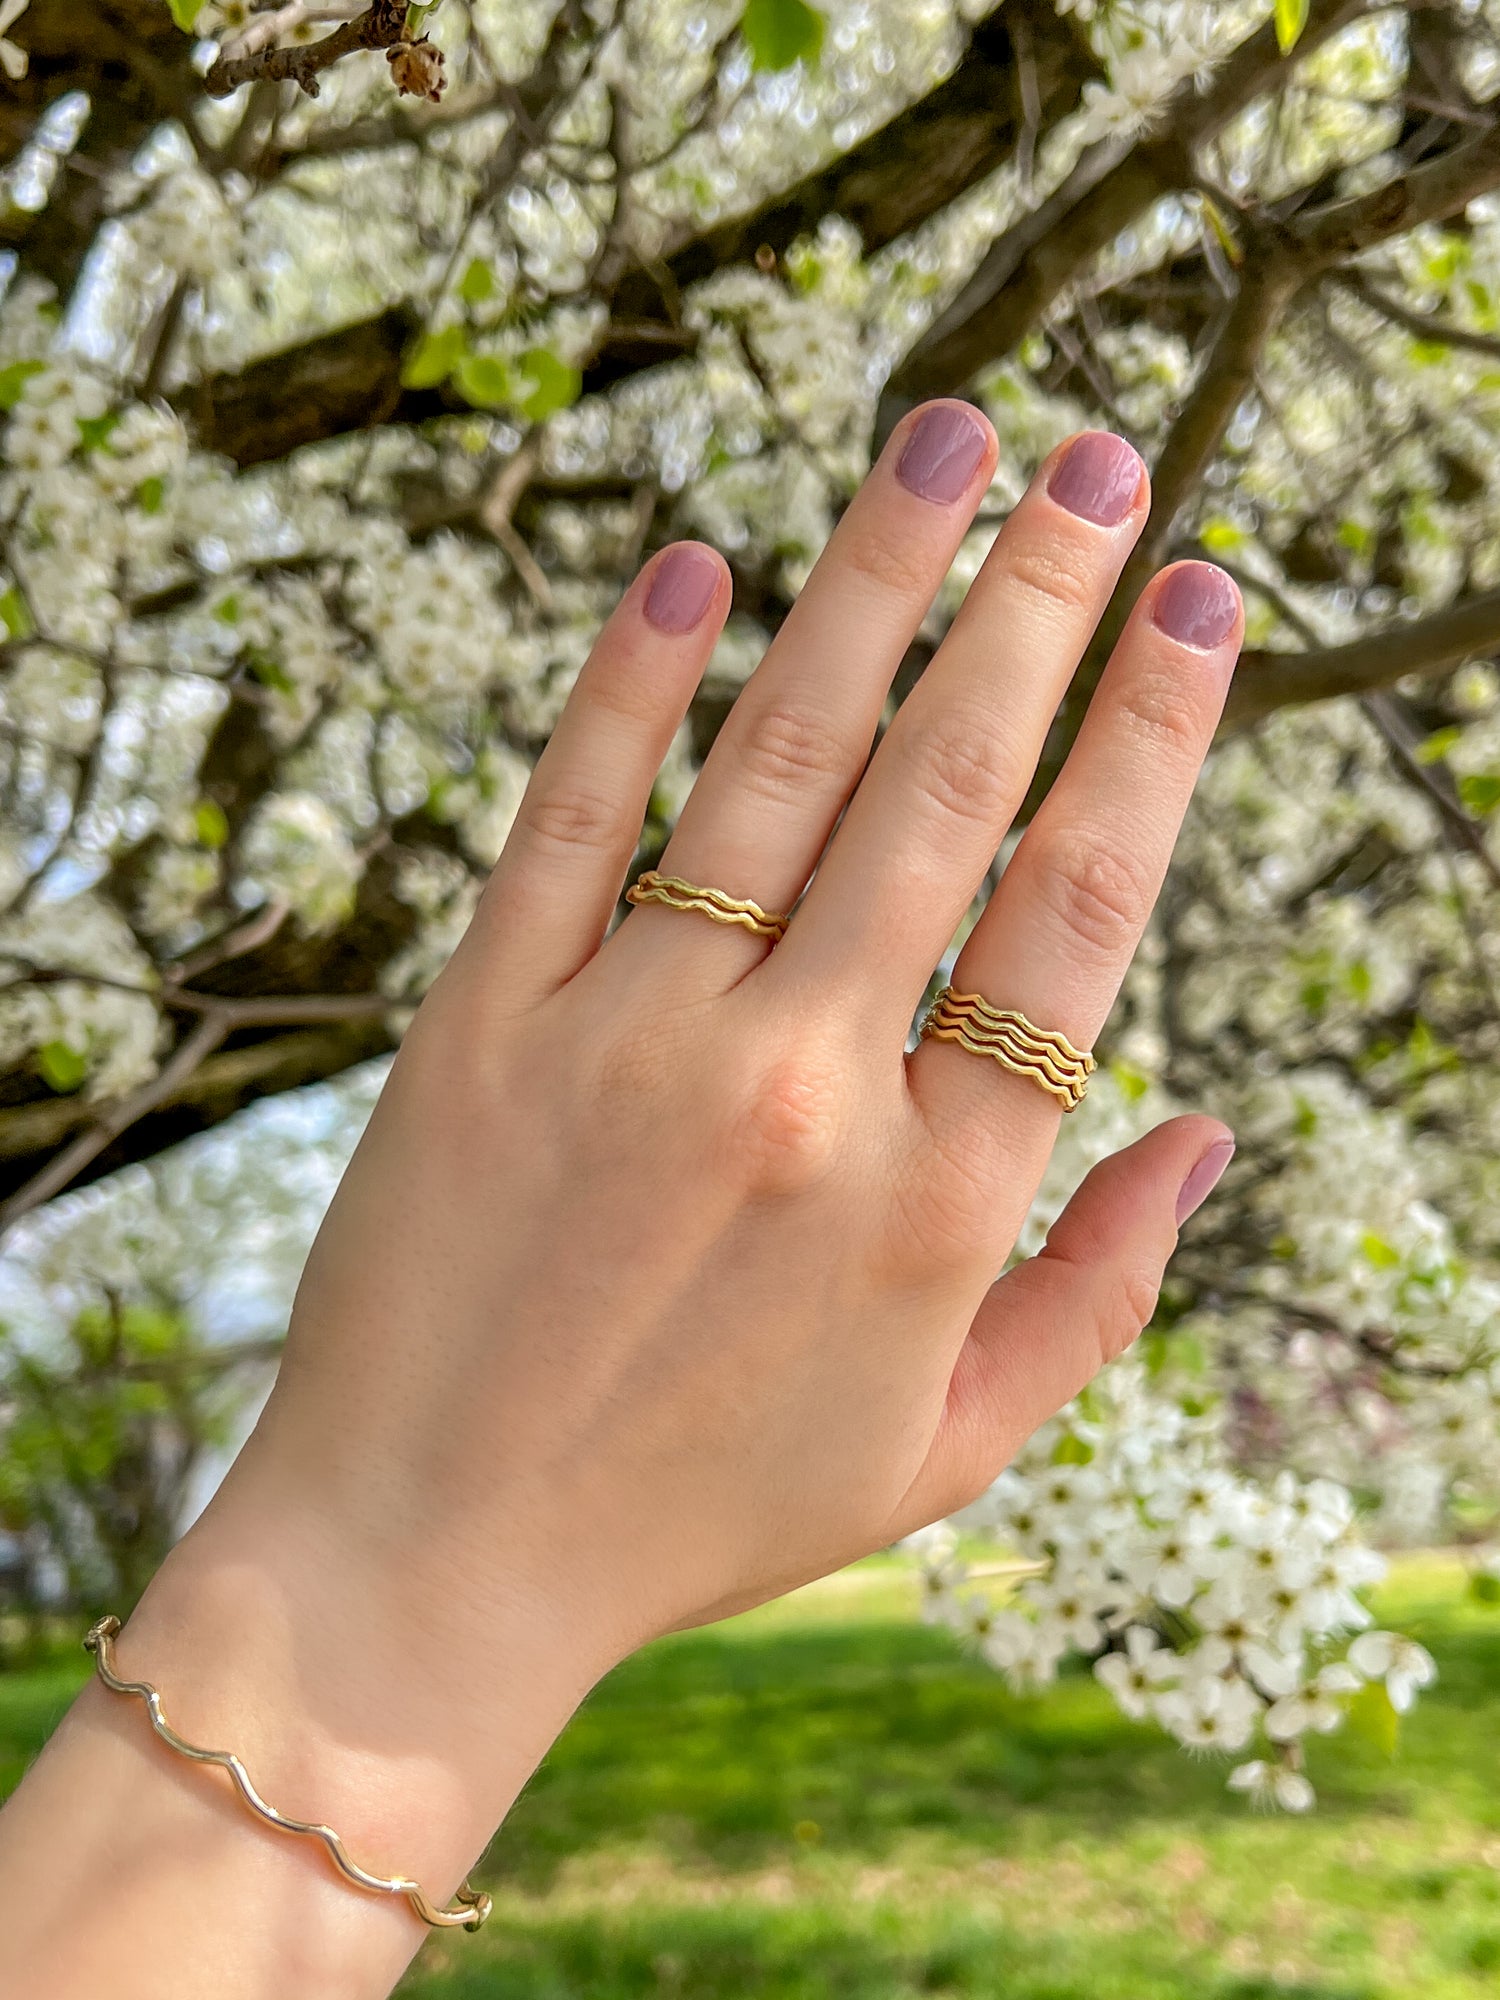 Jewelry designer Lily Wujek's hand wearing The Scallop Ring and The Scallop Cuff in 14k yellow gold